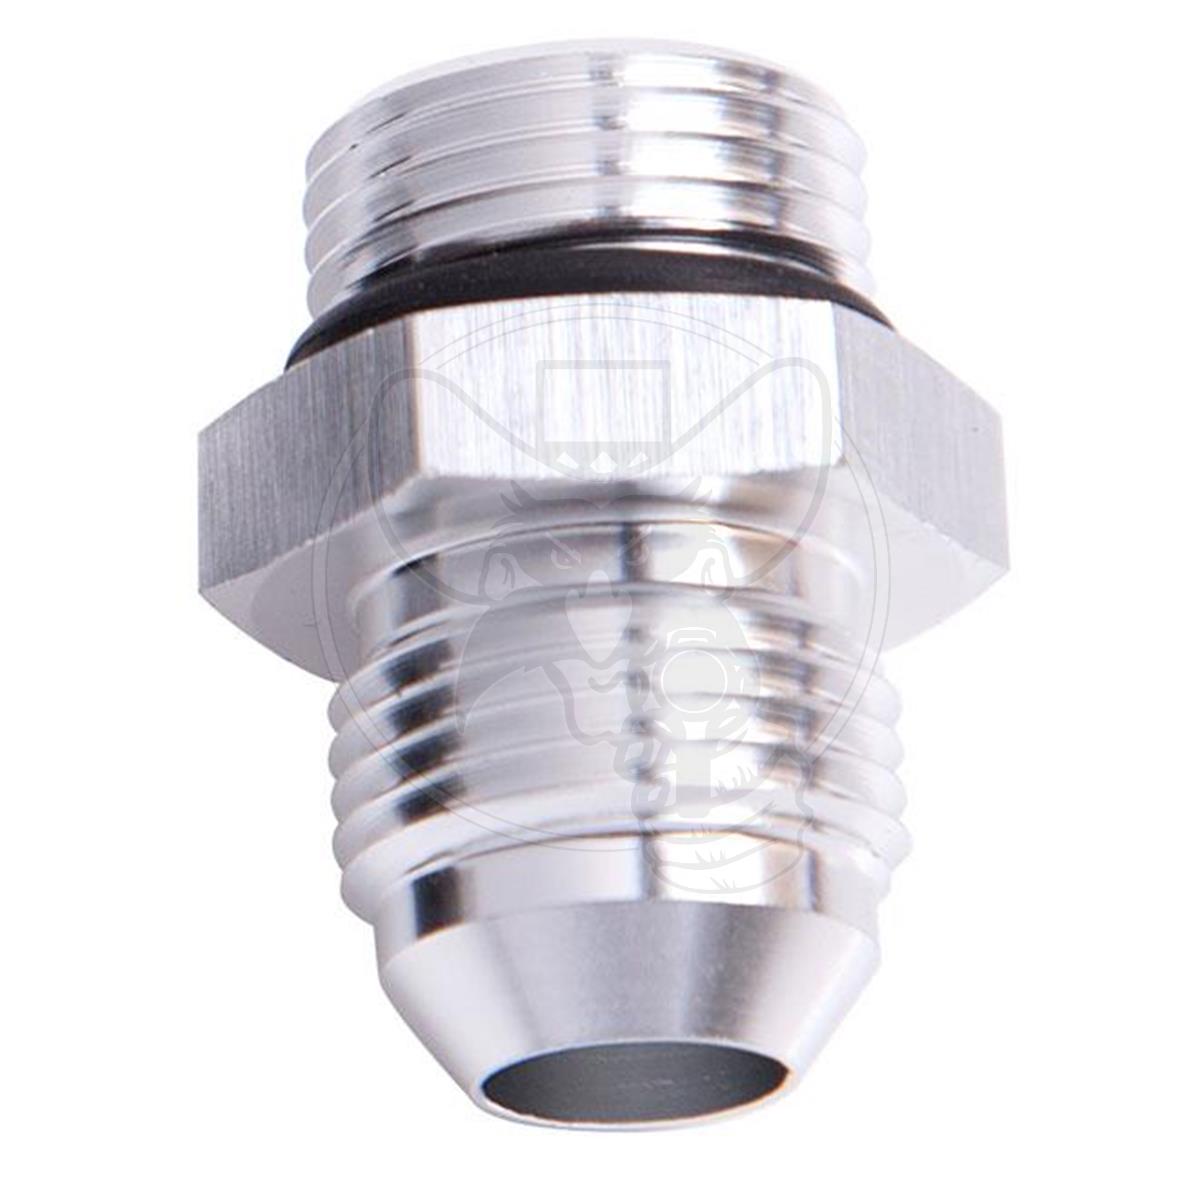 Aeroflow -10 ORB to -10AN Straight Male Flare Adapter - Silver